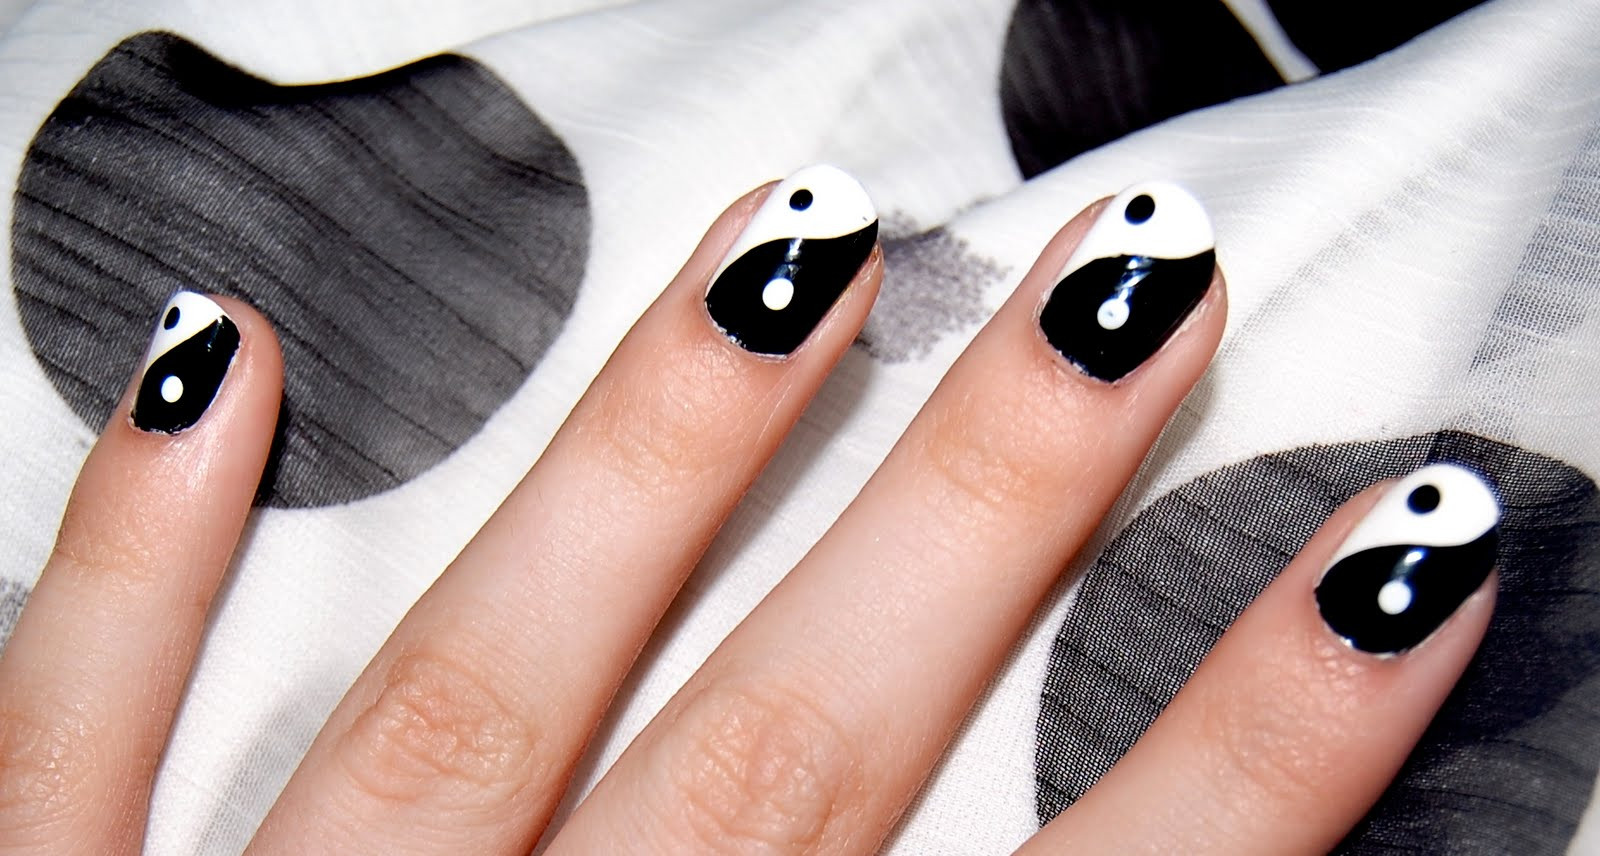 Yin Yang Nail Art: Different Color Combinations to Try - wide 2